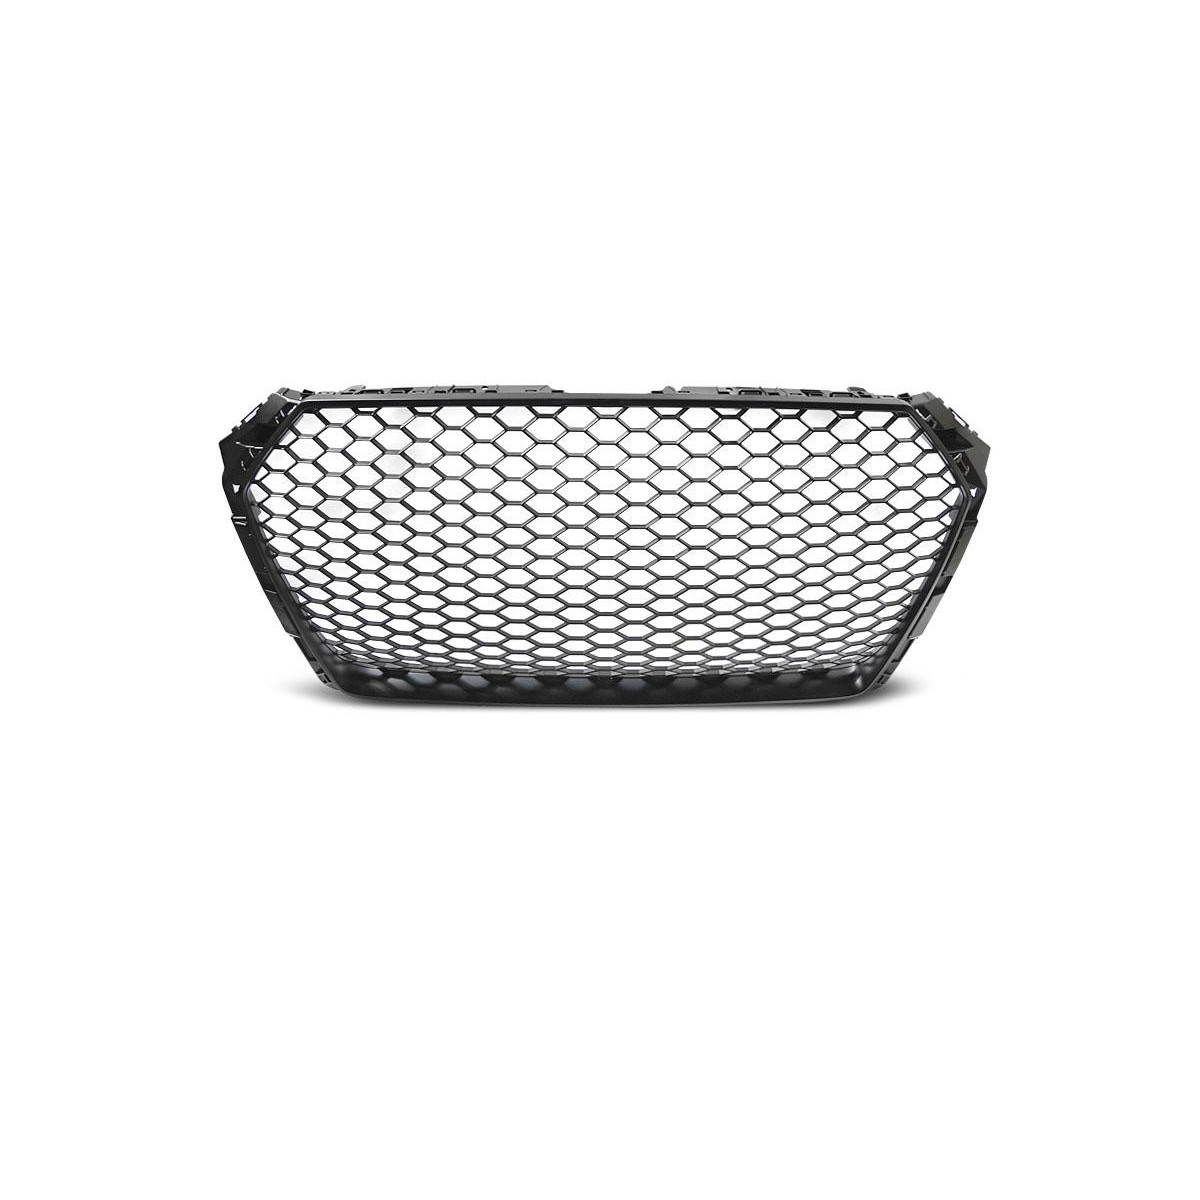 GRILL AUDI A4 B9 15- BLACK RS-STYLE